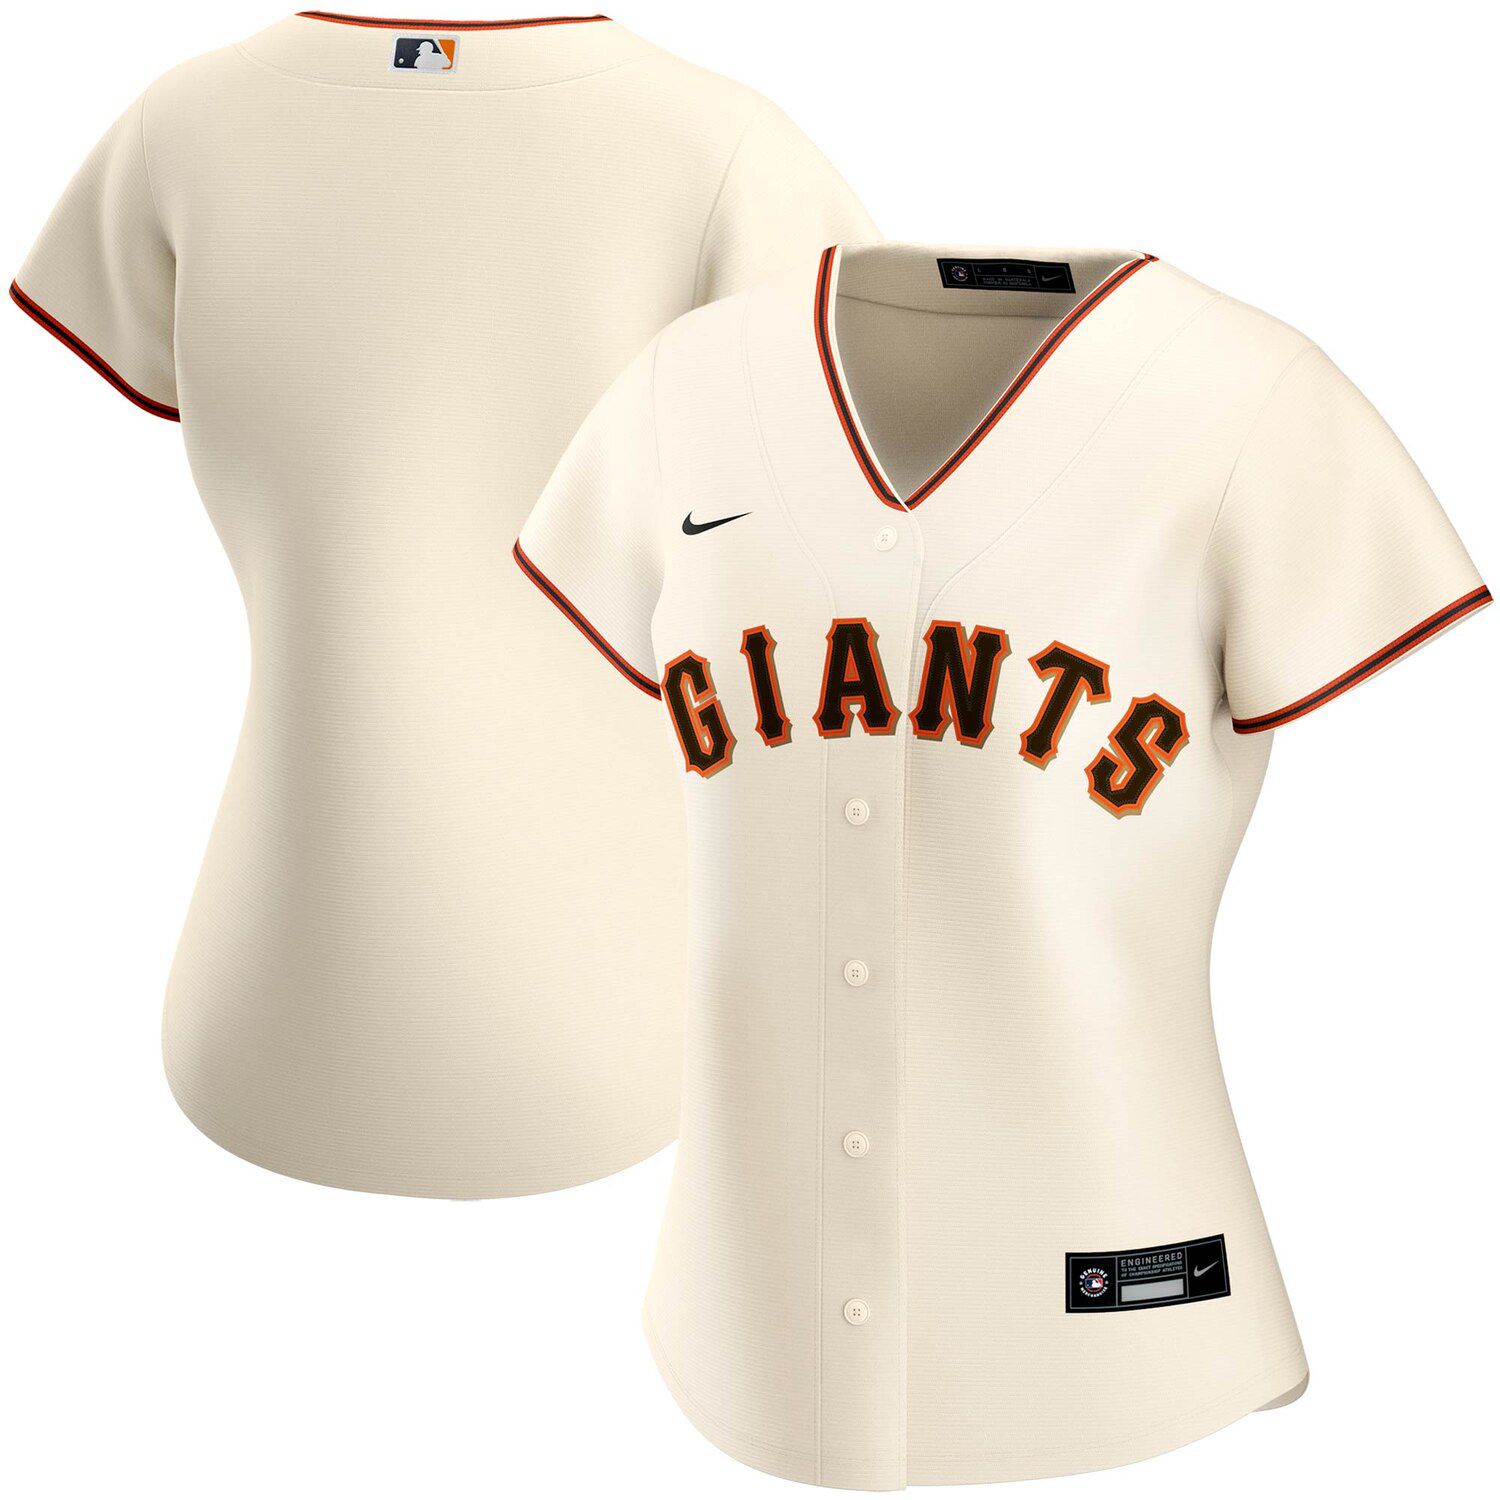 giants official jersey